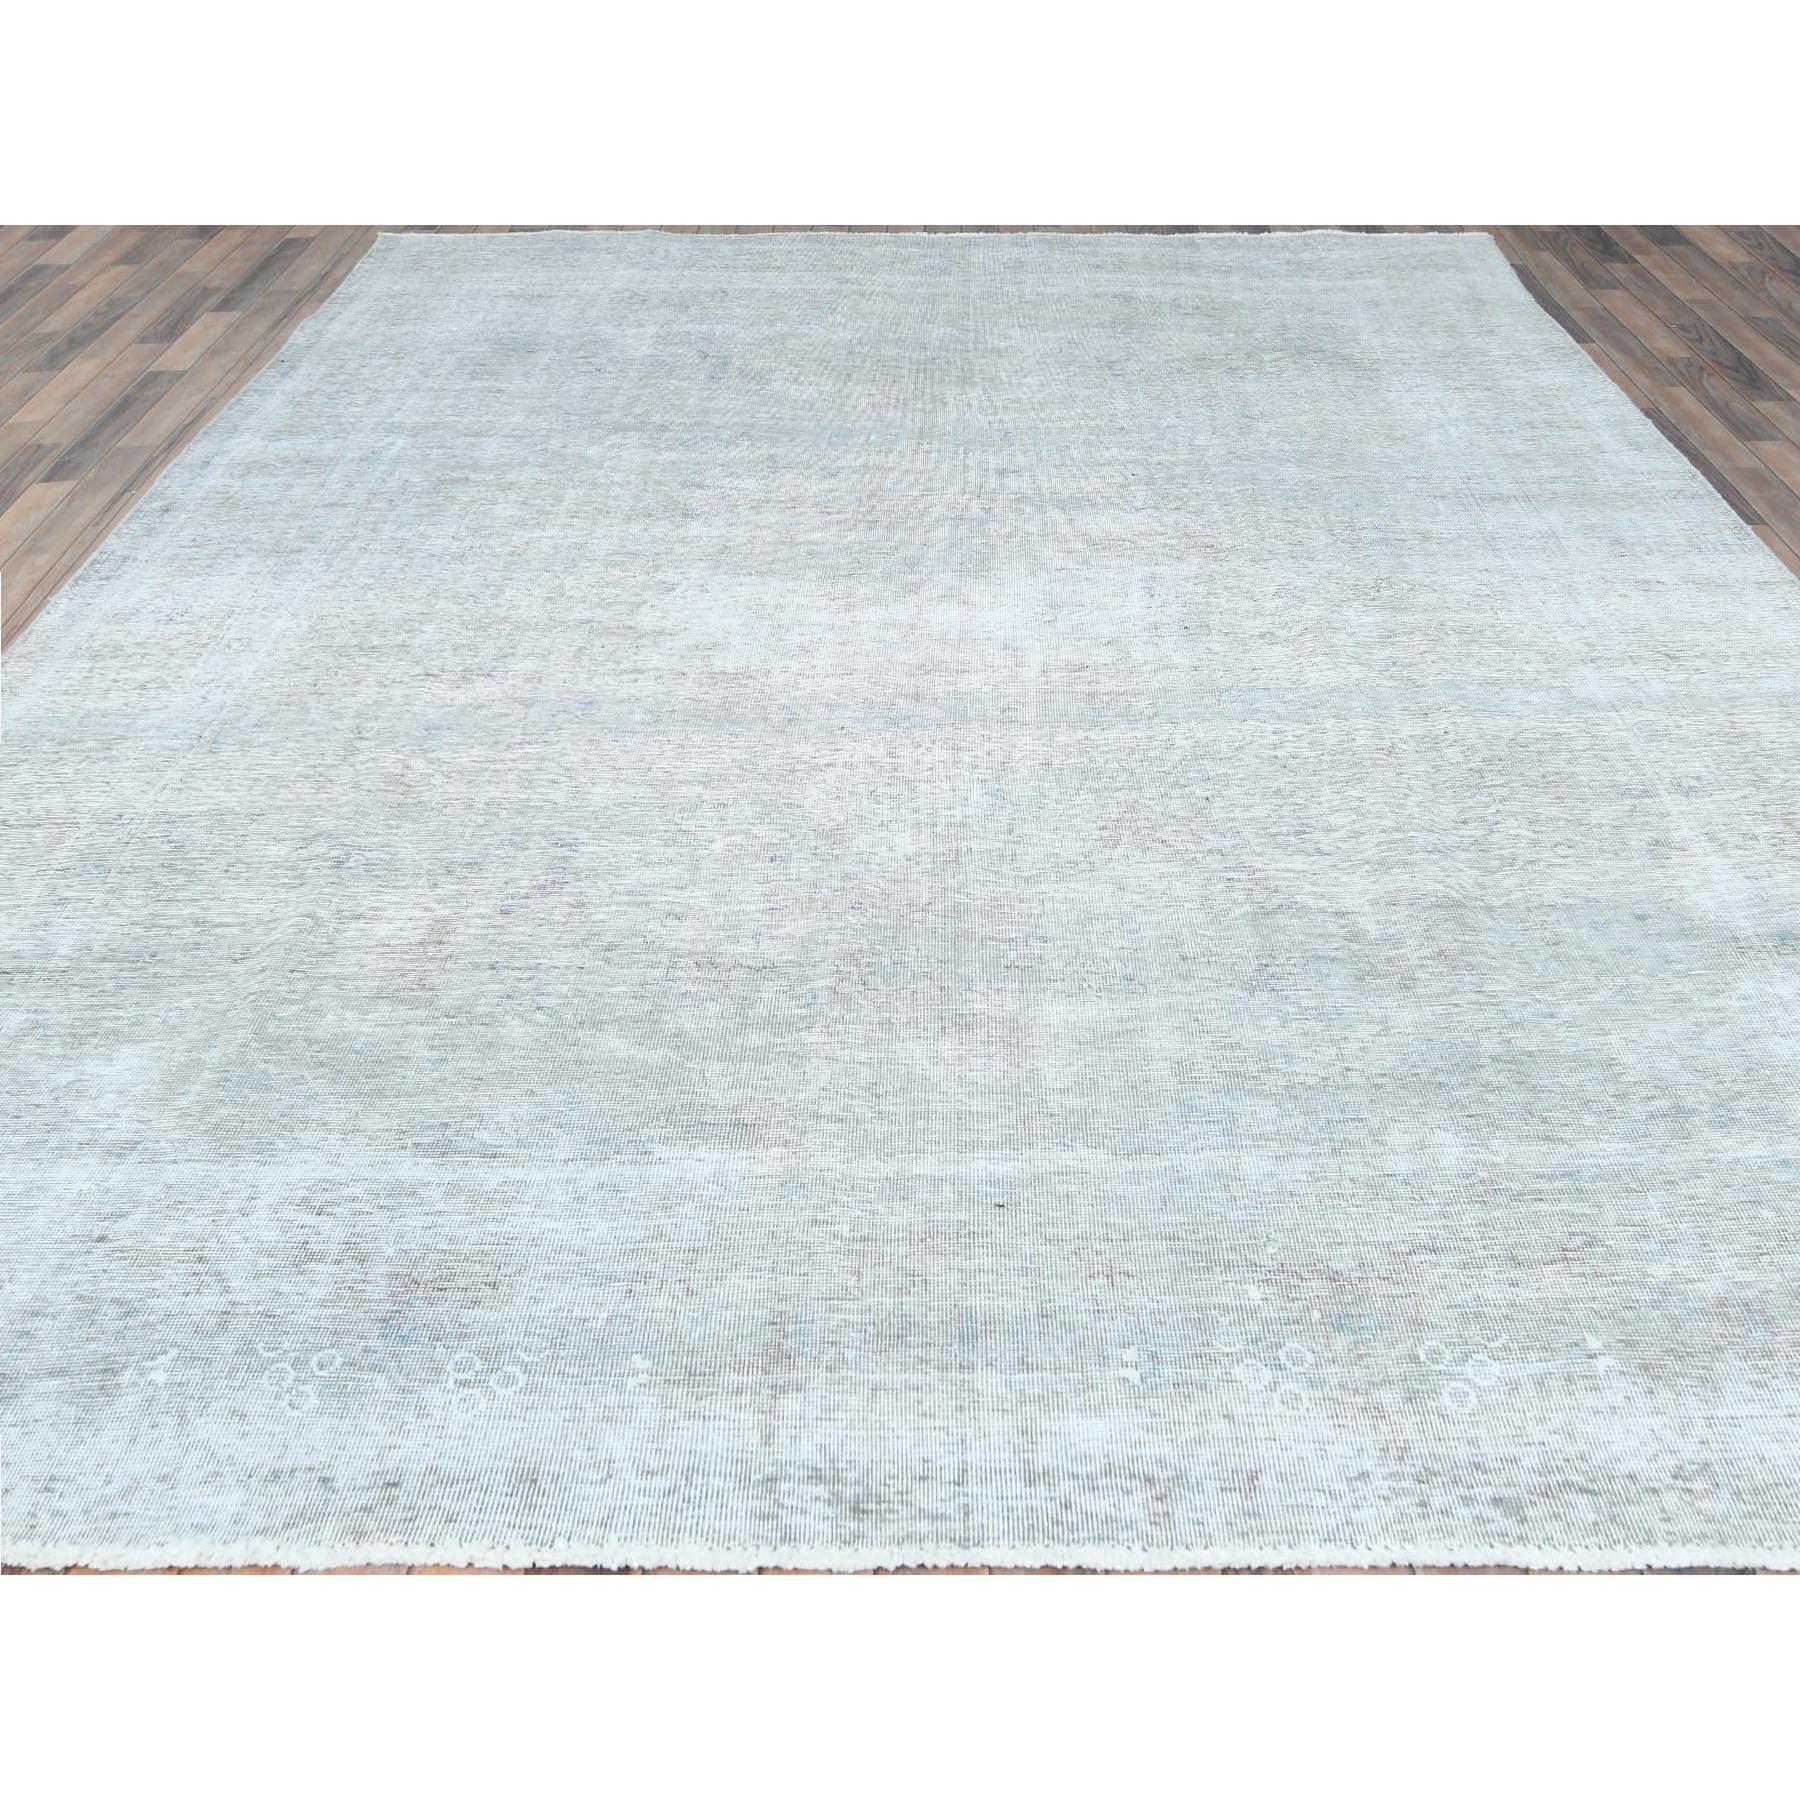 Medieval Blueish Gray Distressed Feel Worn Wool Hand Knotted Vintage Persian Tabriz Rug For Sale